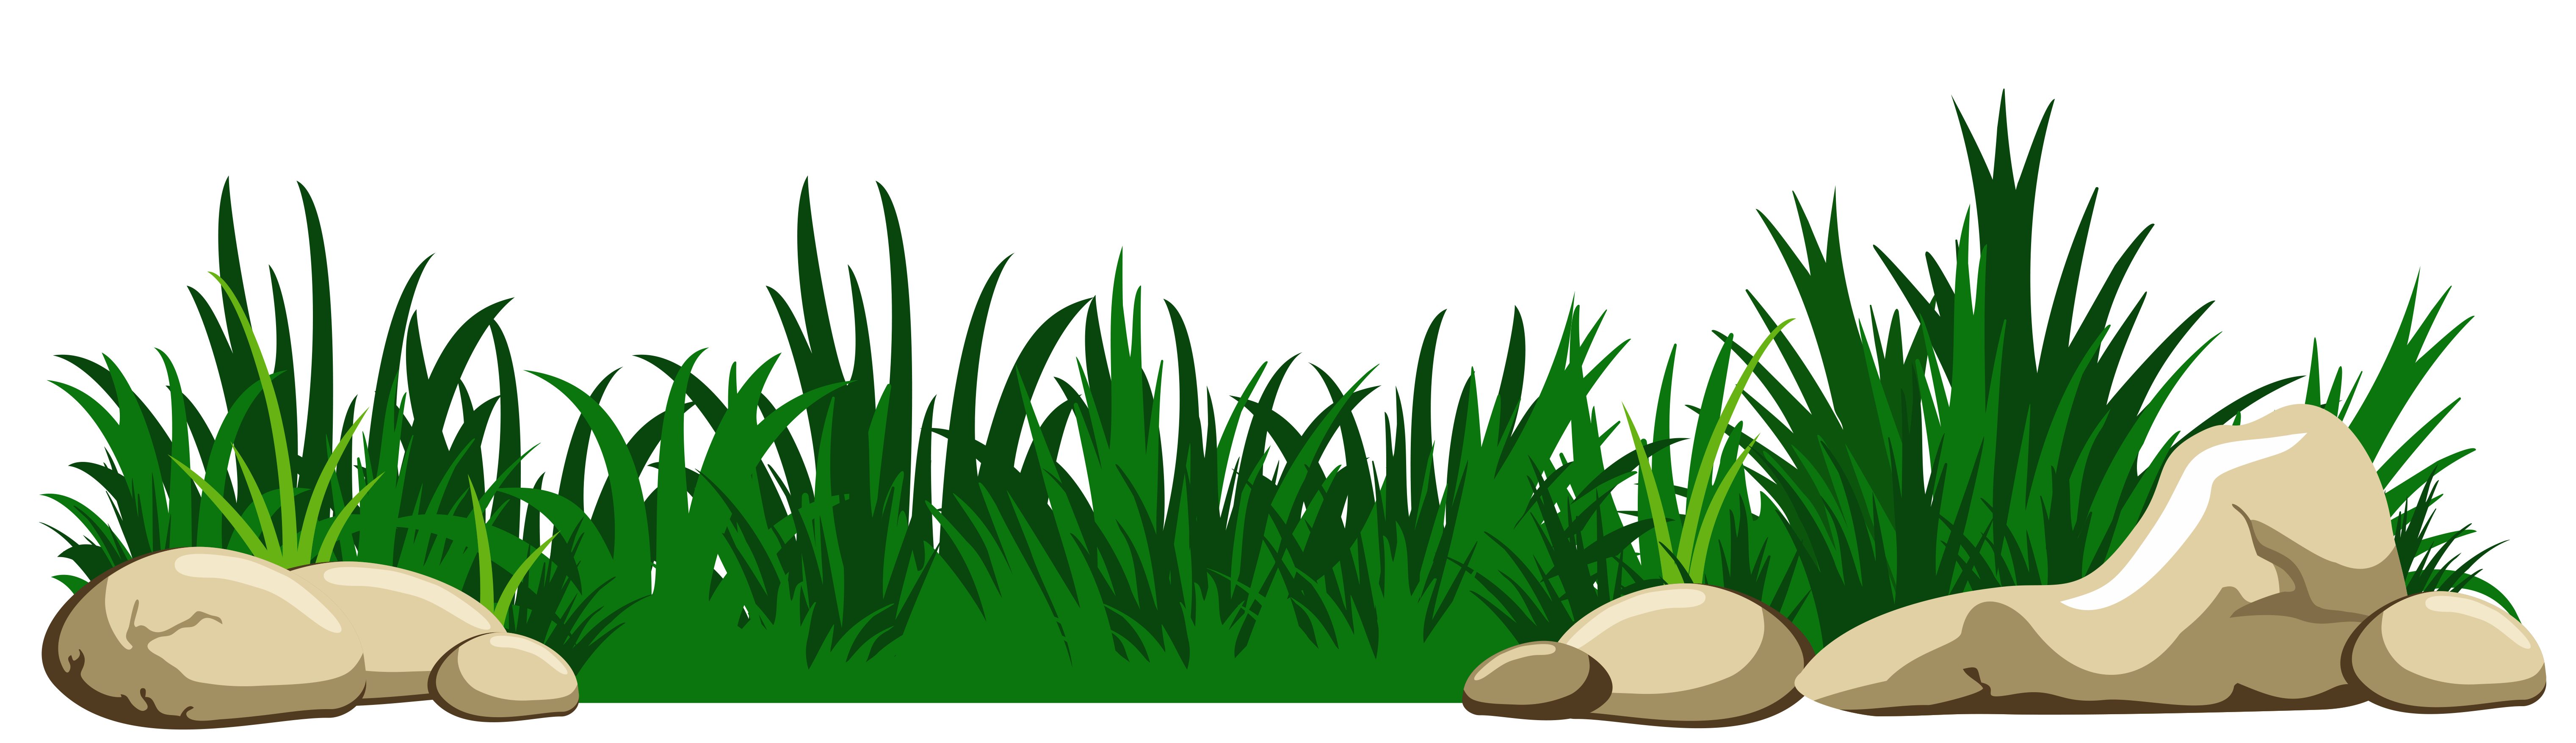 Animated grass clipart